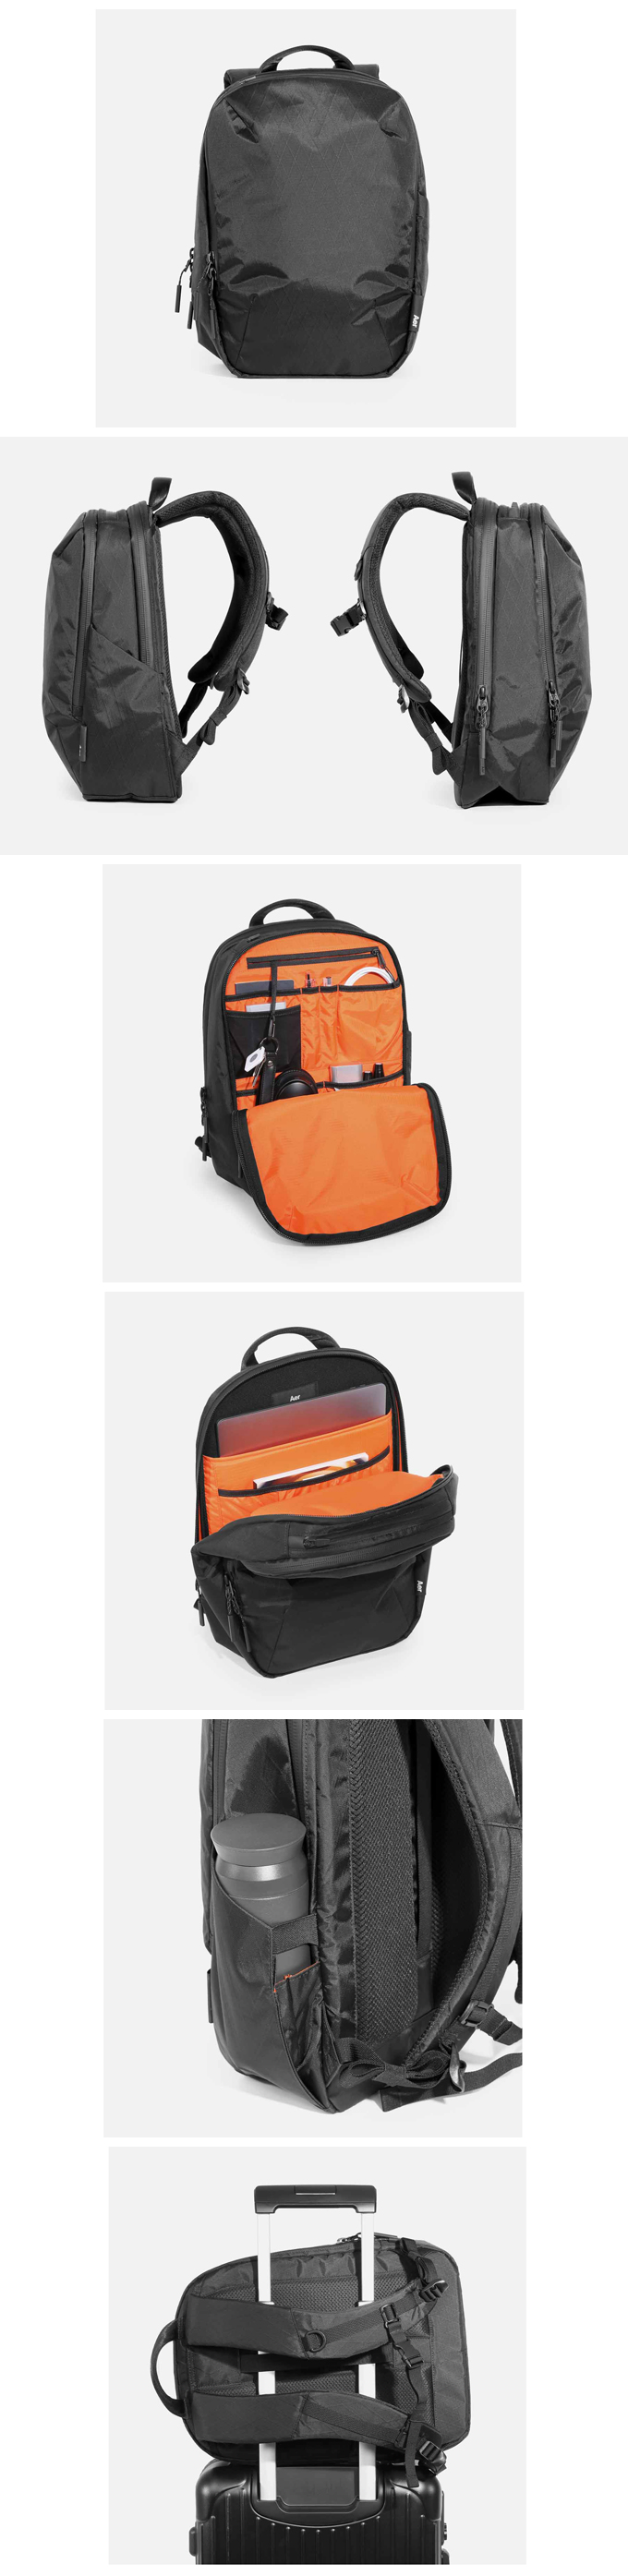 Aer Day Pack 2 X-PAC